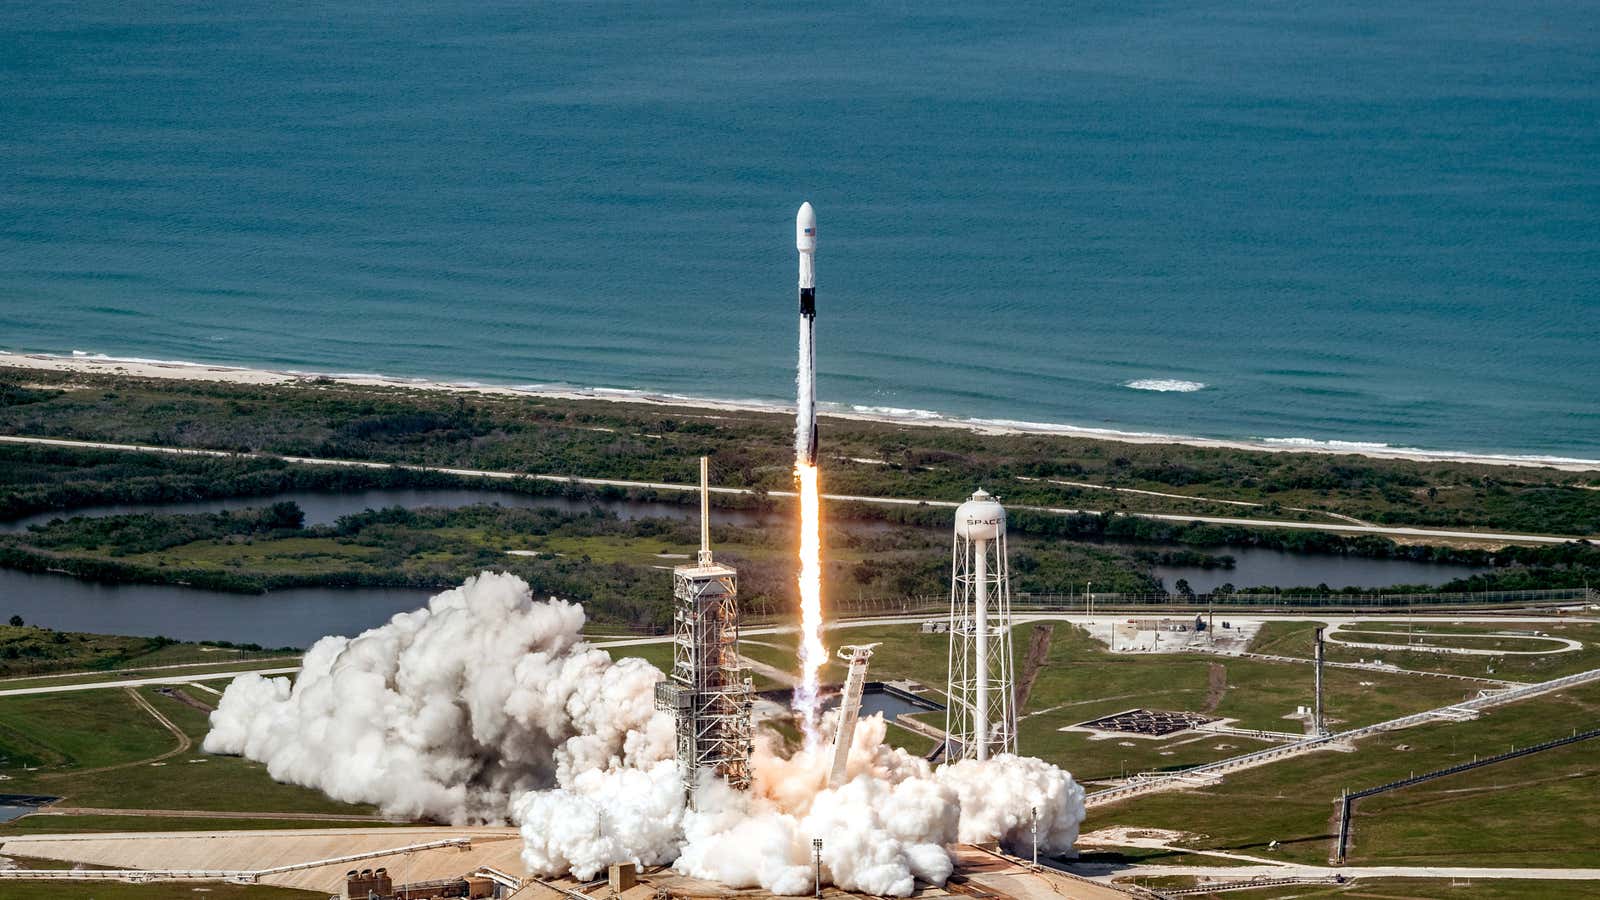 The first Falcon 9 Block 5 rocket lifts off on May 11, 2018.